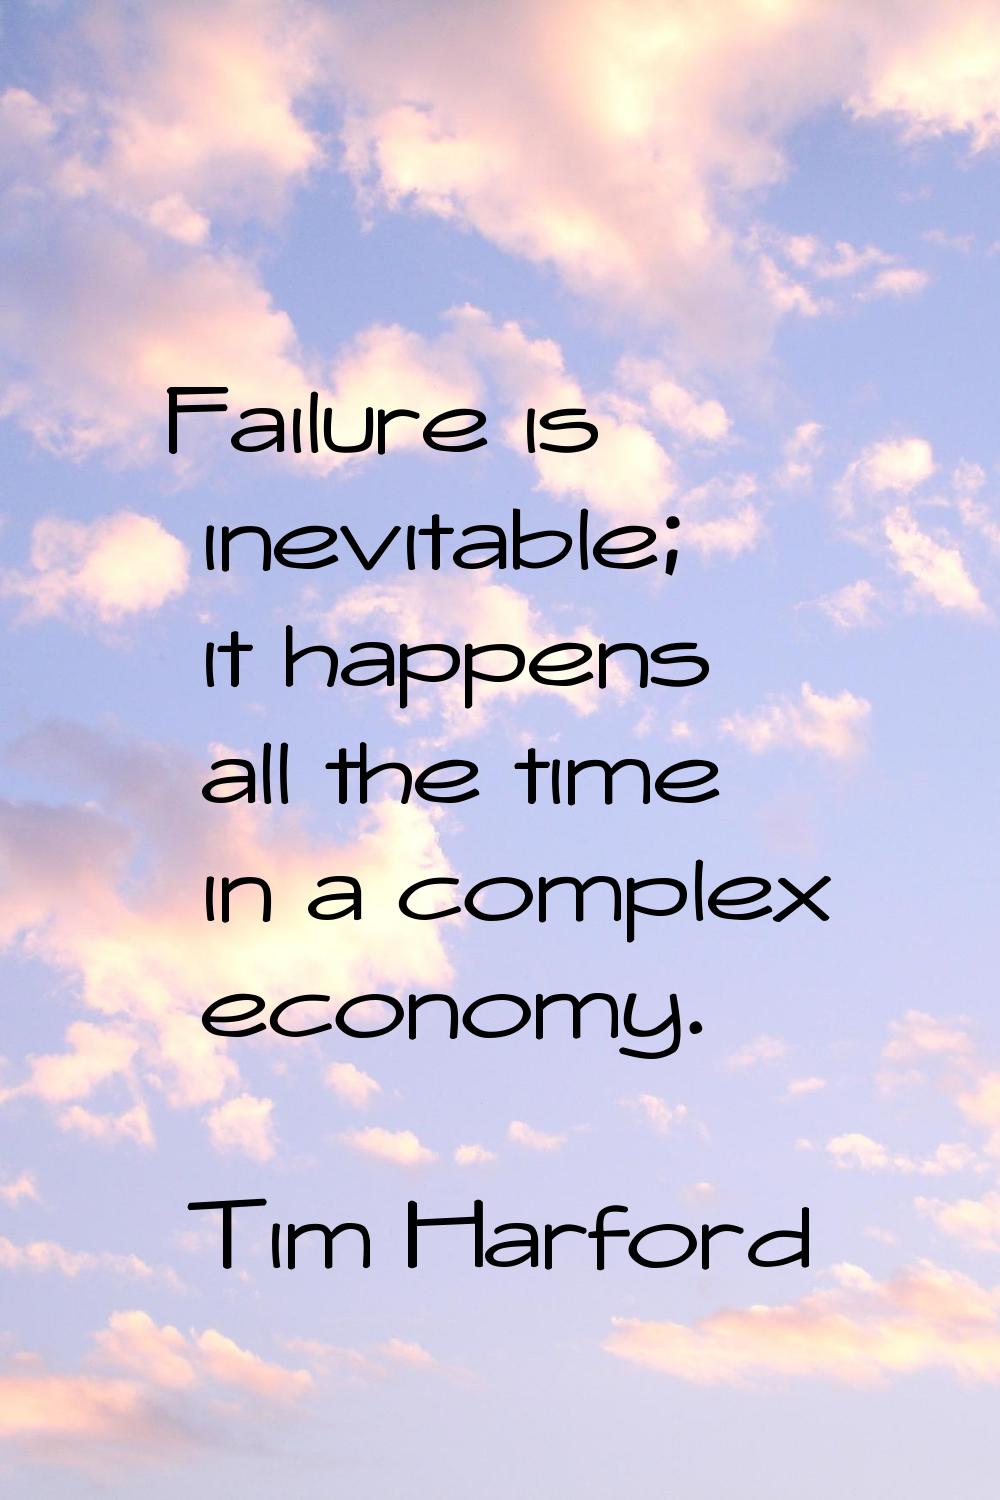 Failure is inevitable; it happens all the time in a complex economy.